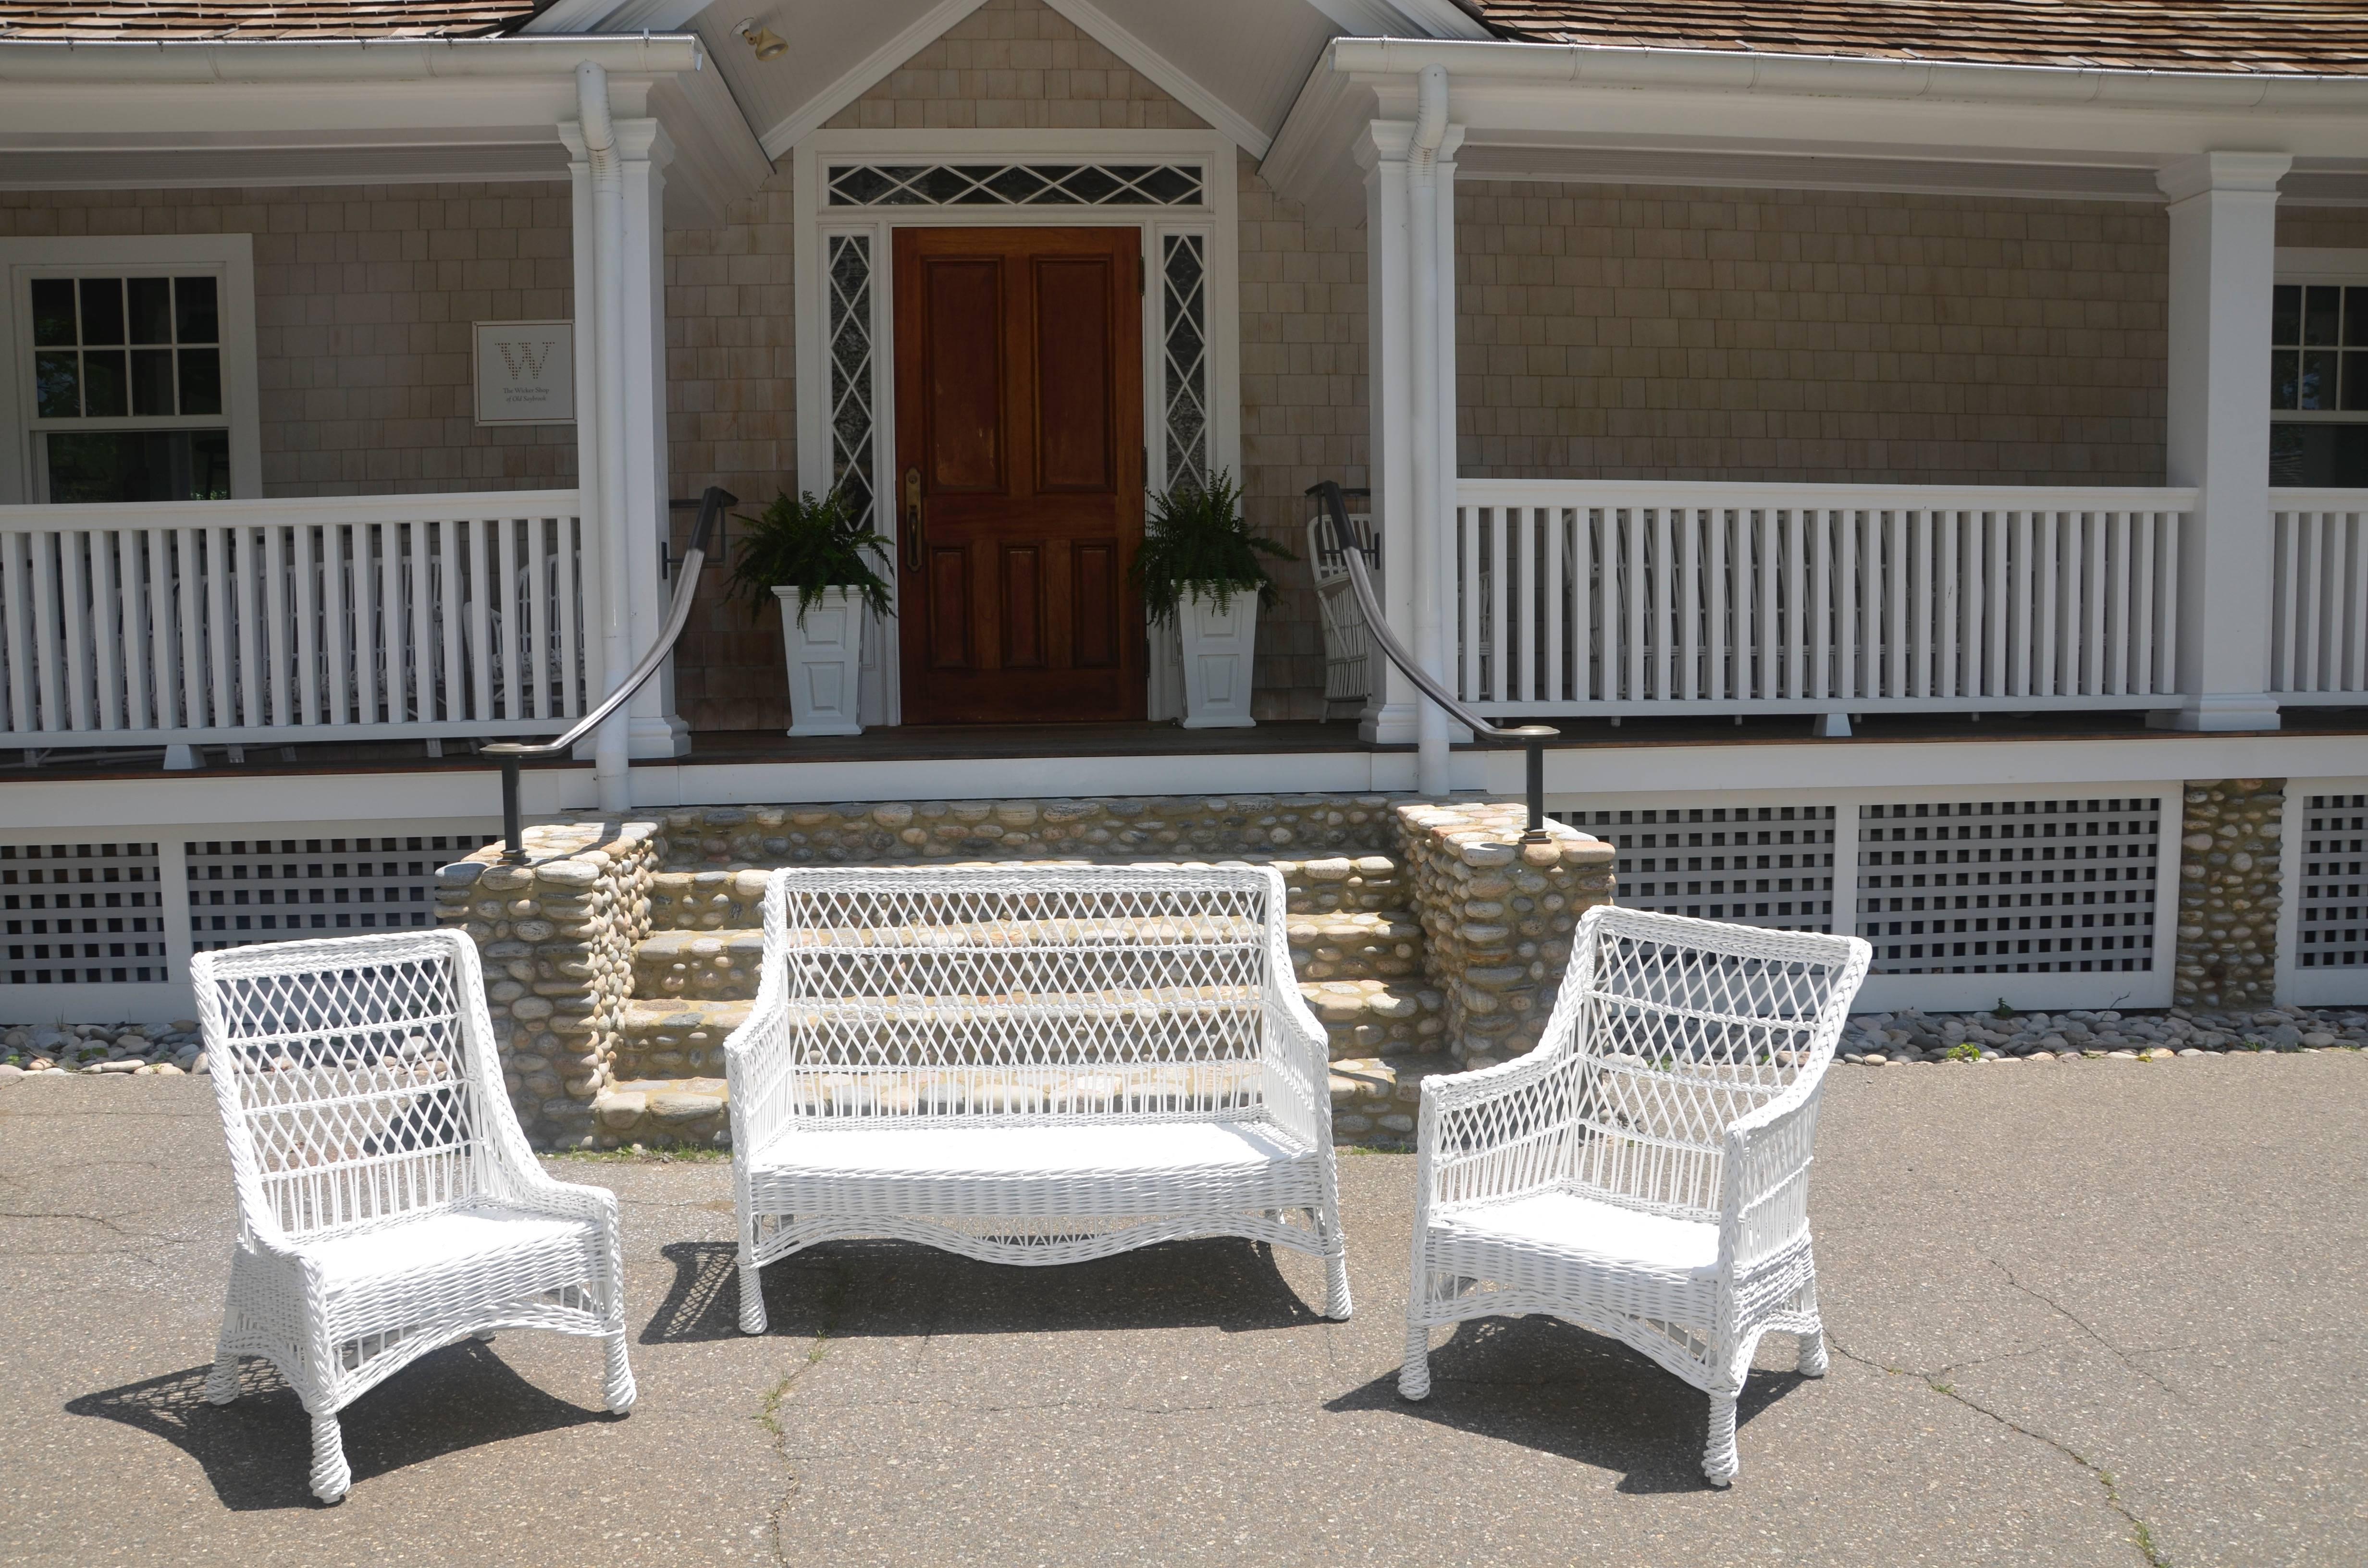 Small-scale three-piece antique wicker set woven of willow and painted white. 

Measures: Settee measures 45